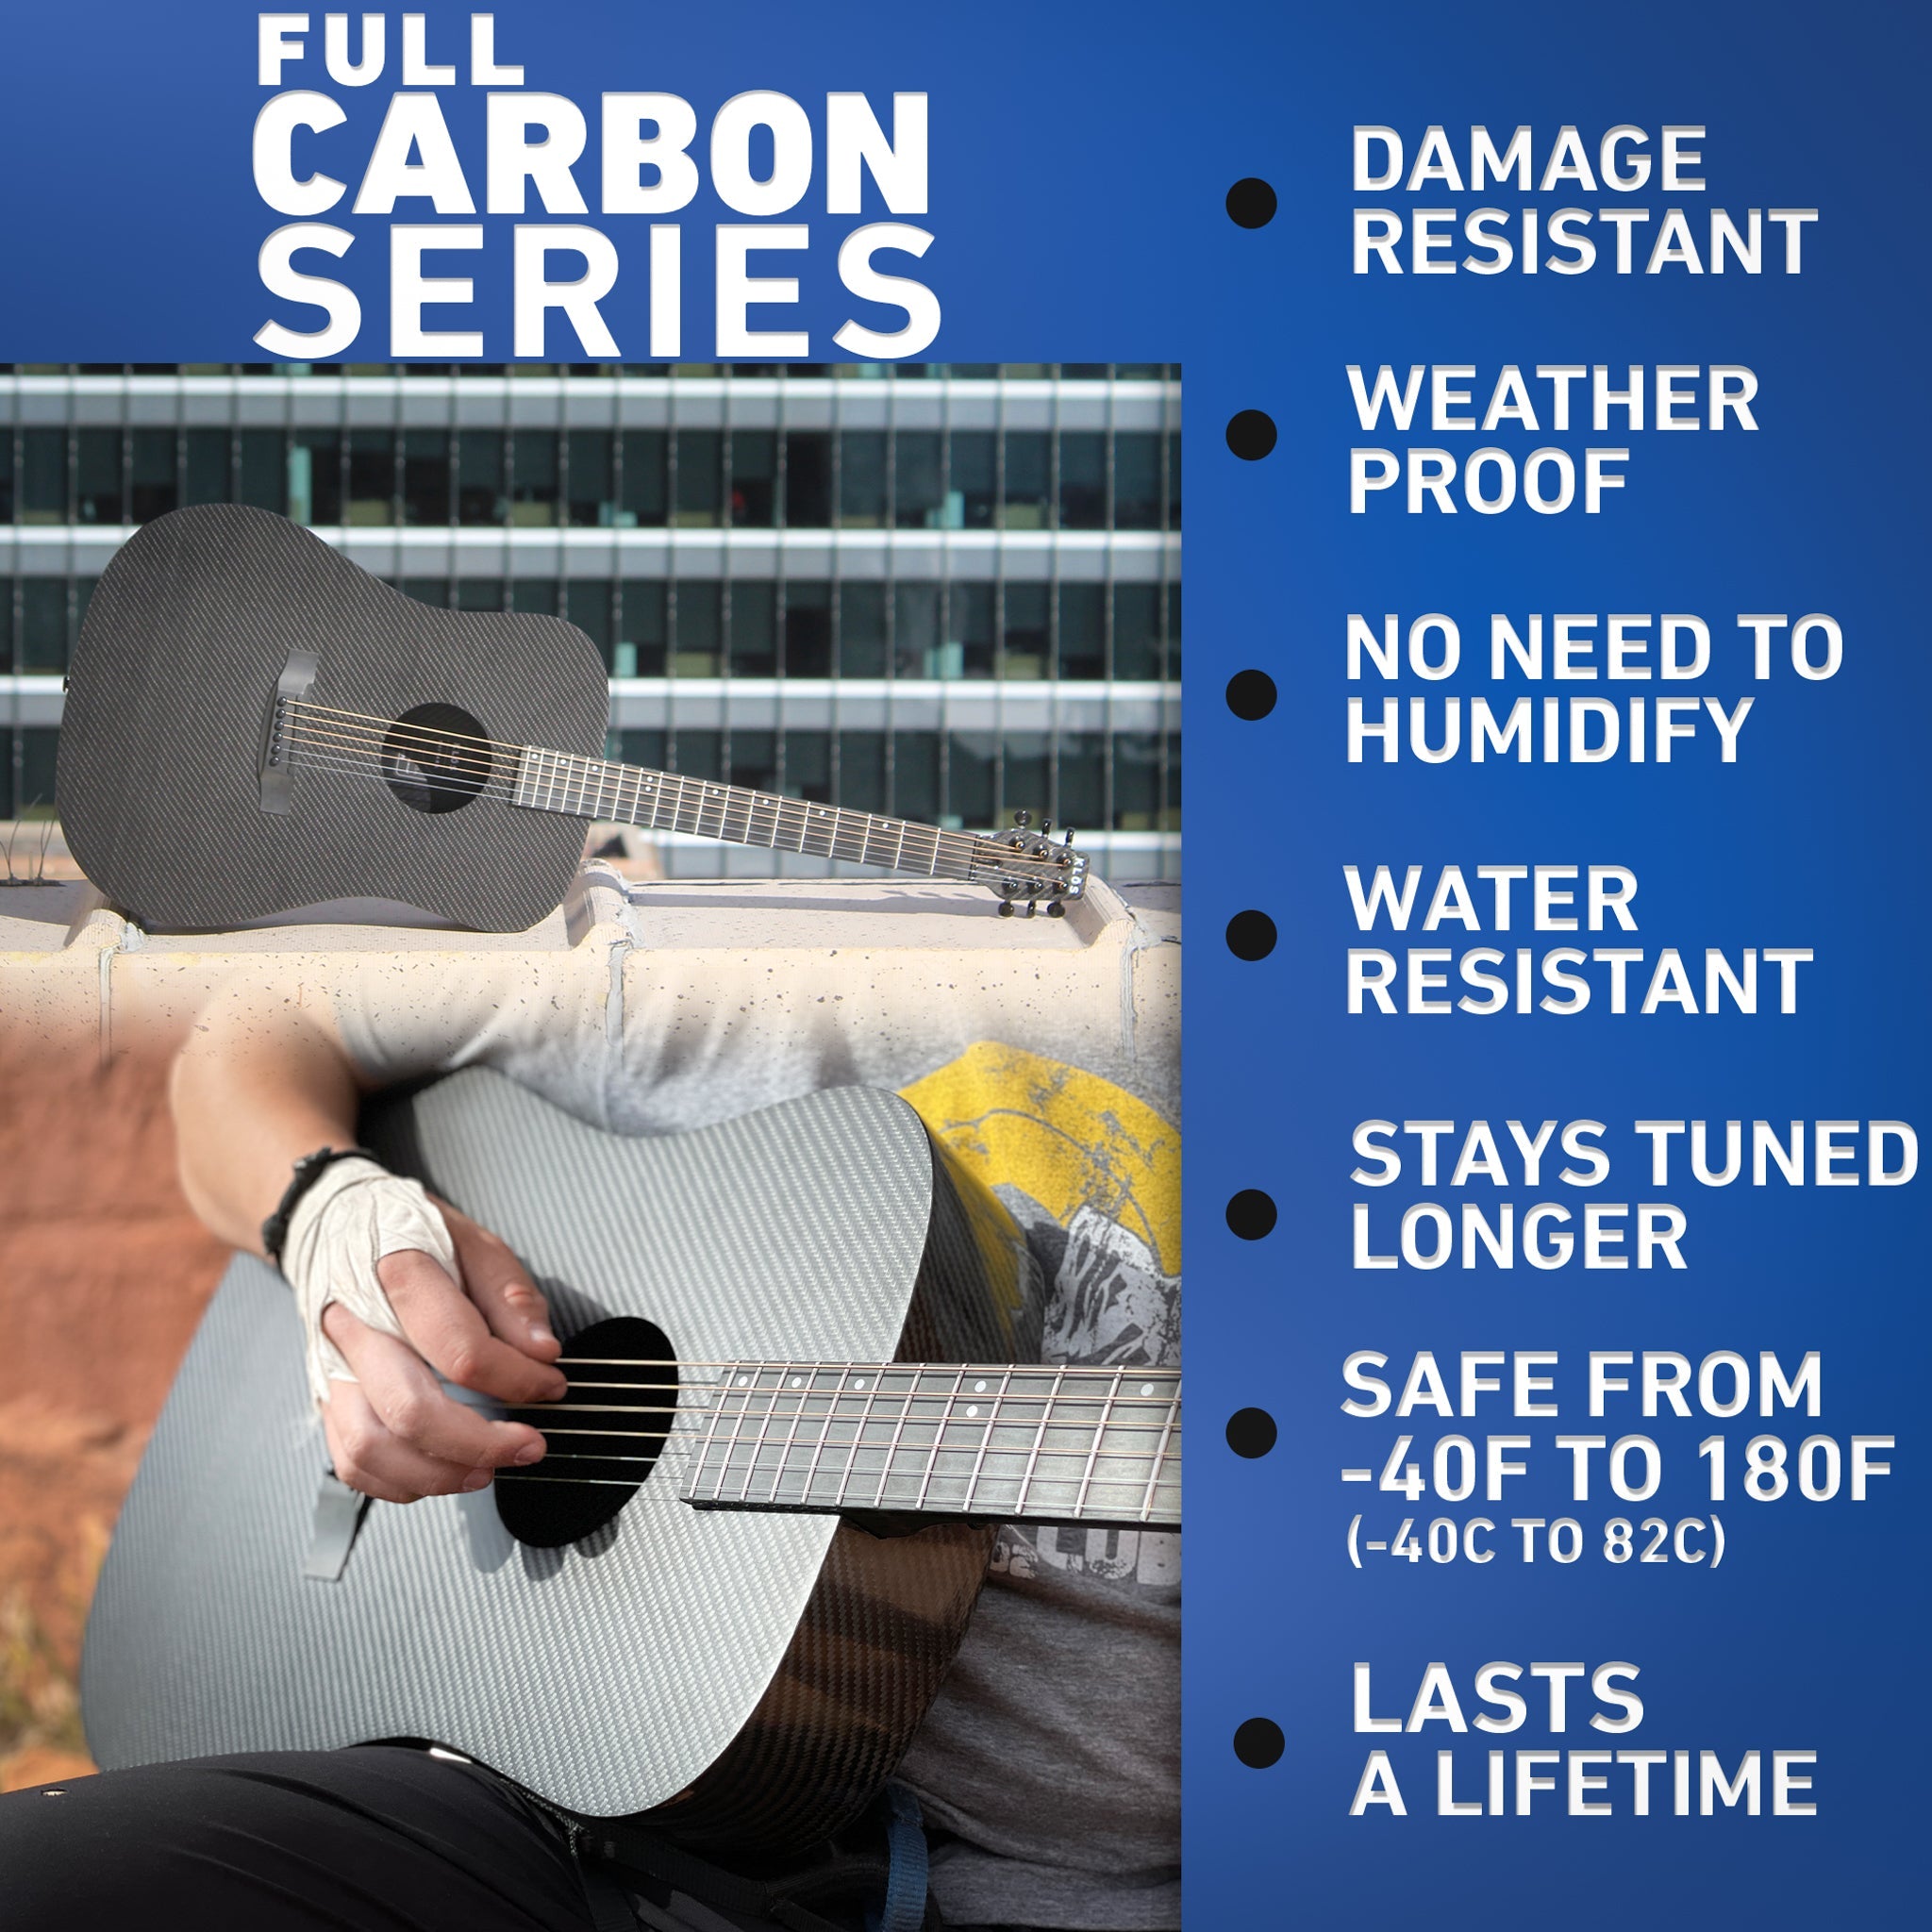 Damage resistant, water resistant and weather proof. The Full Carbon series has it all.